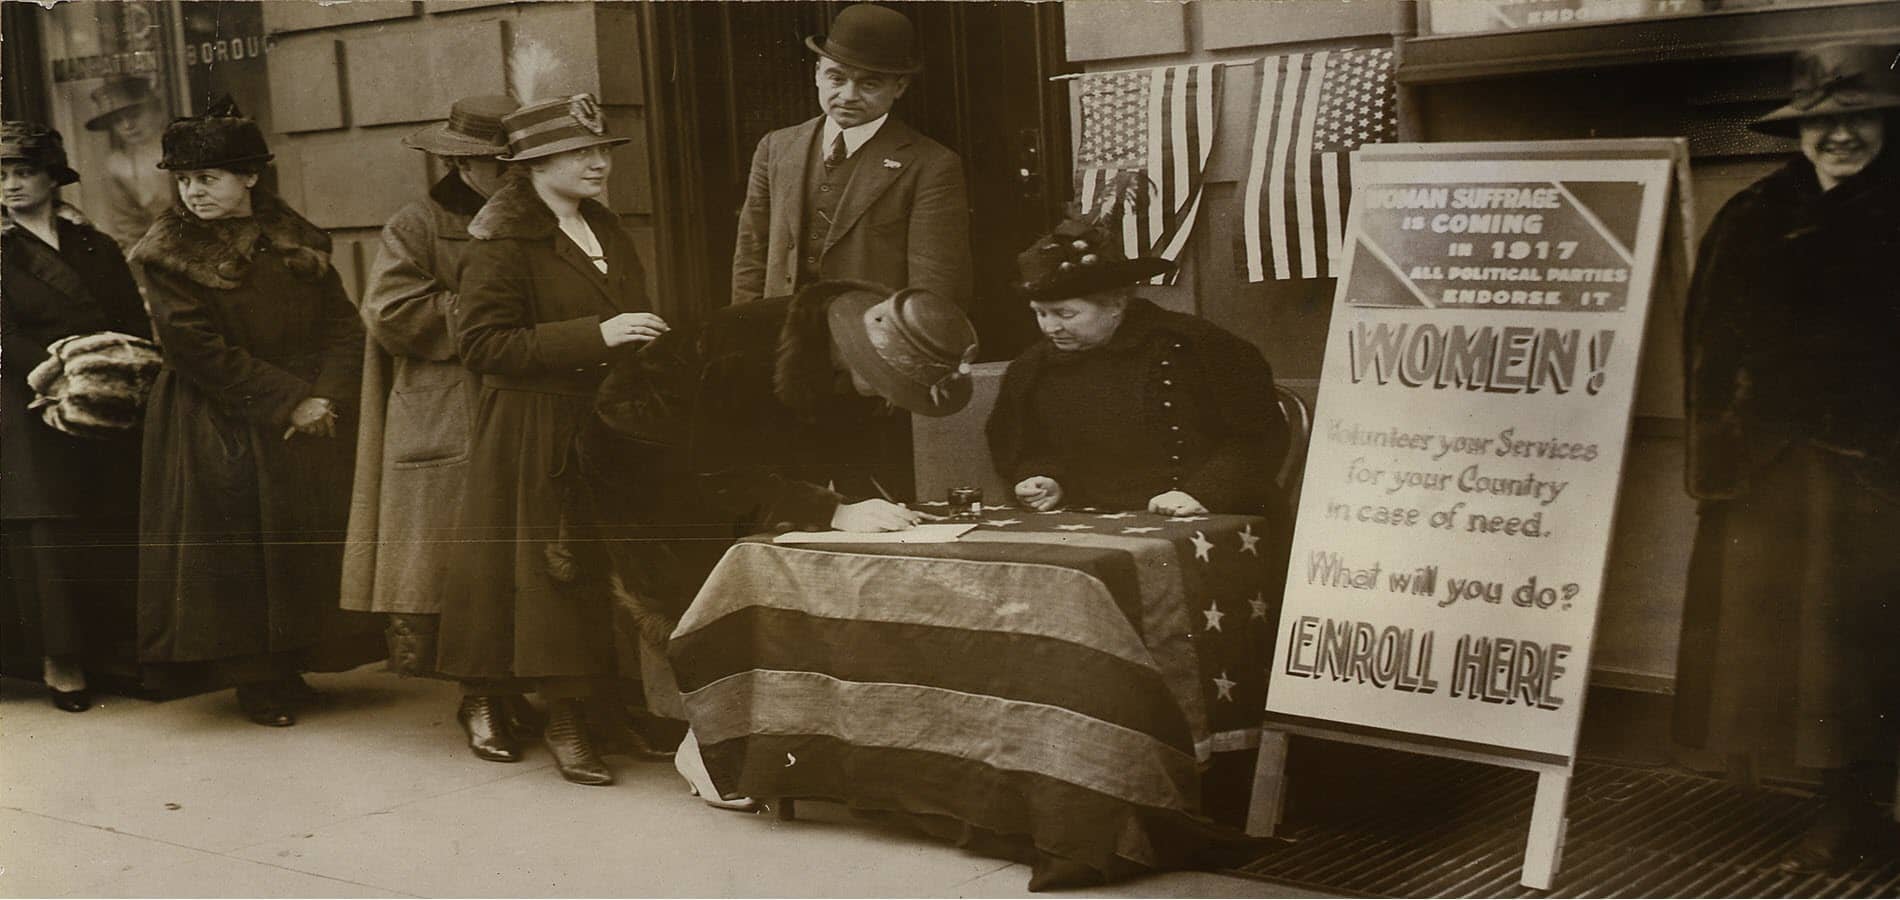 Signing up women voters